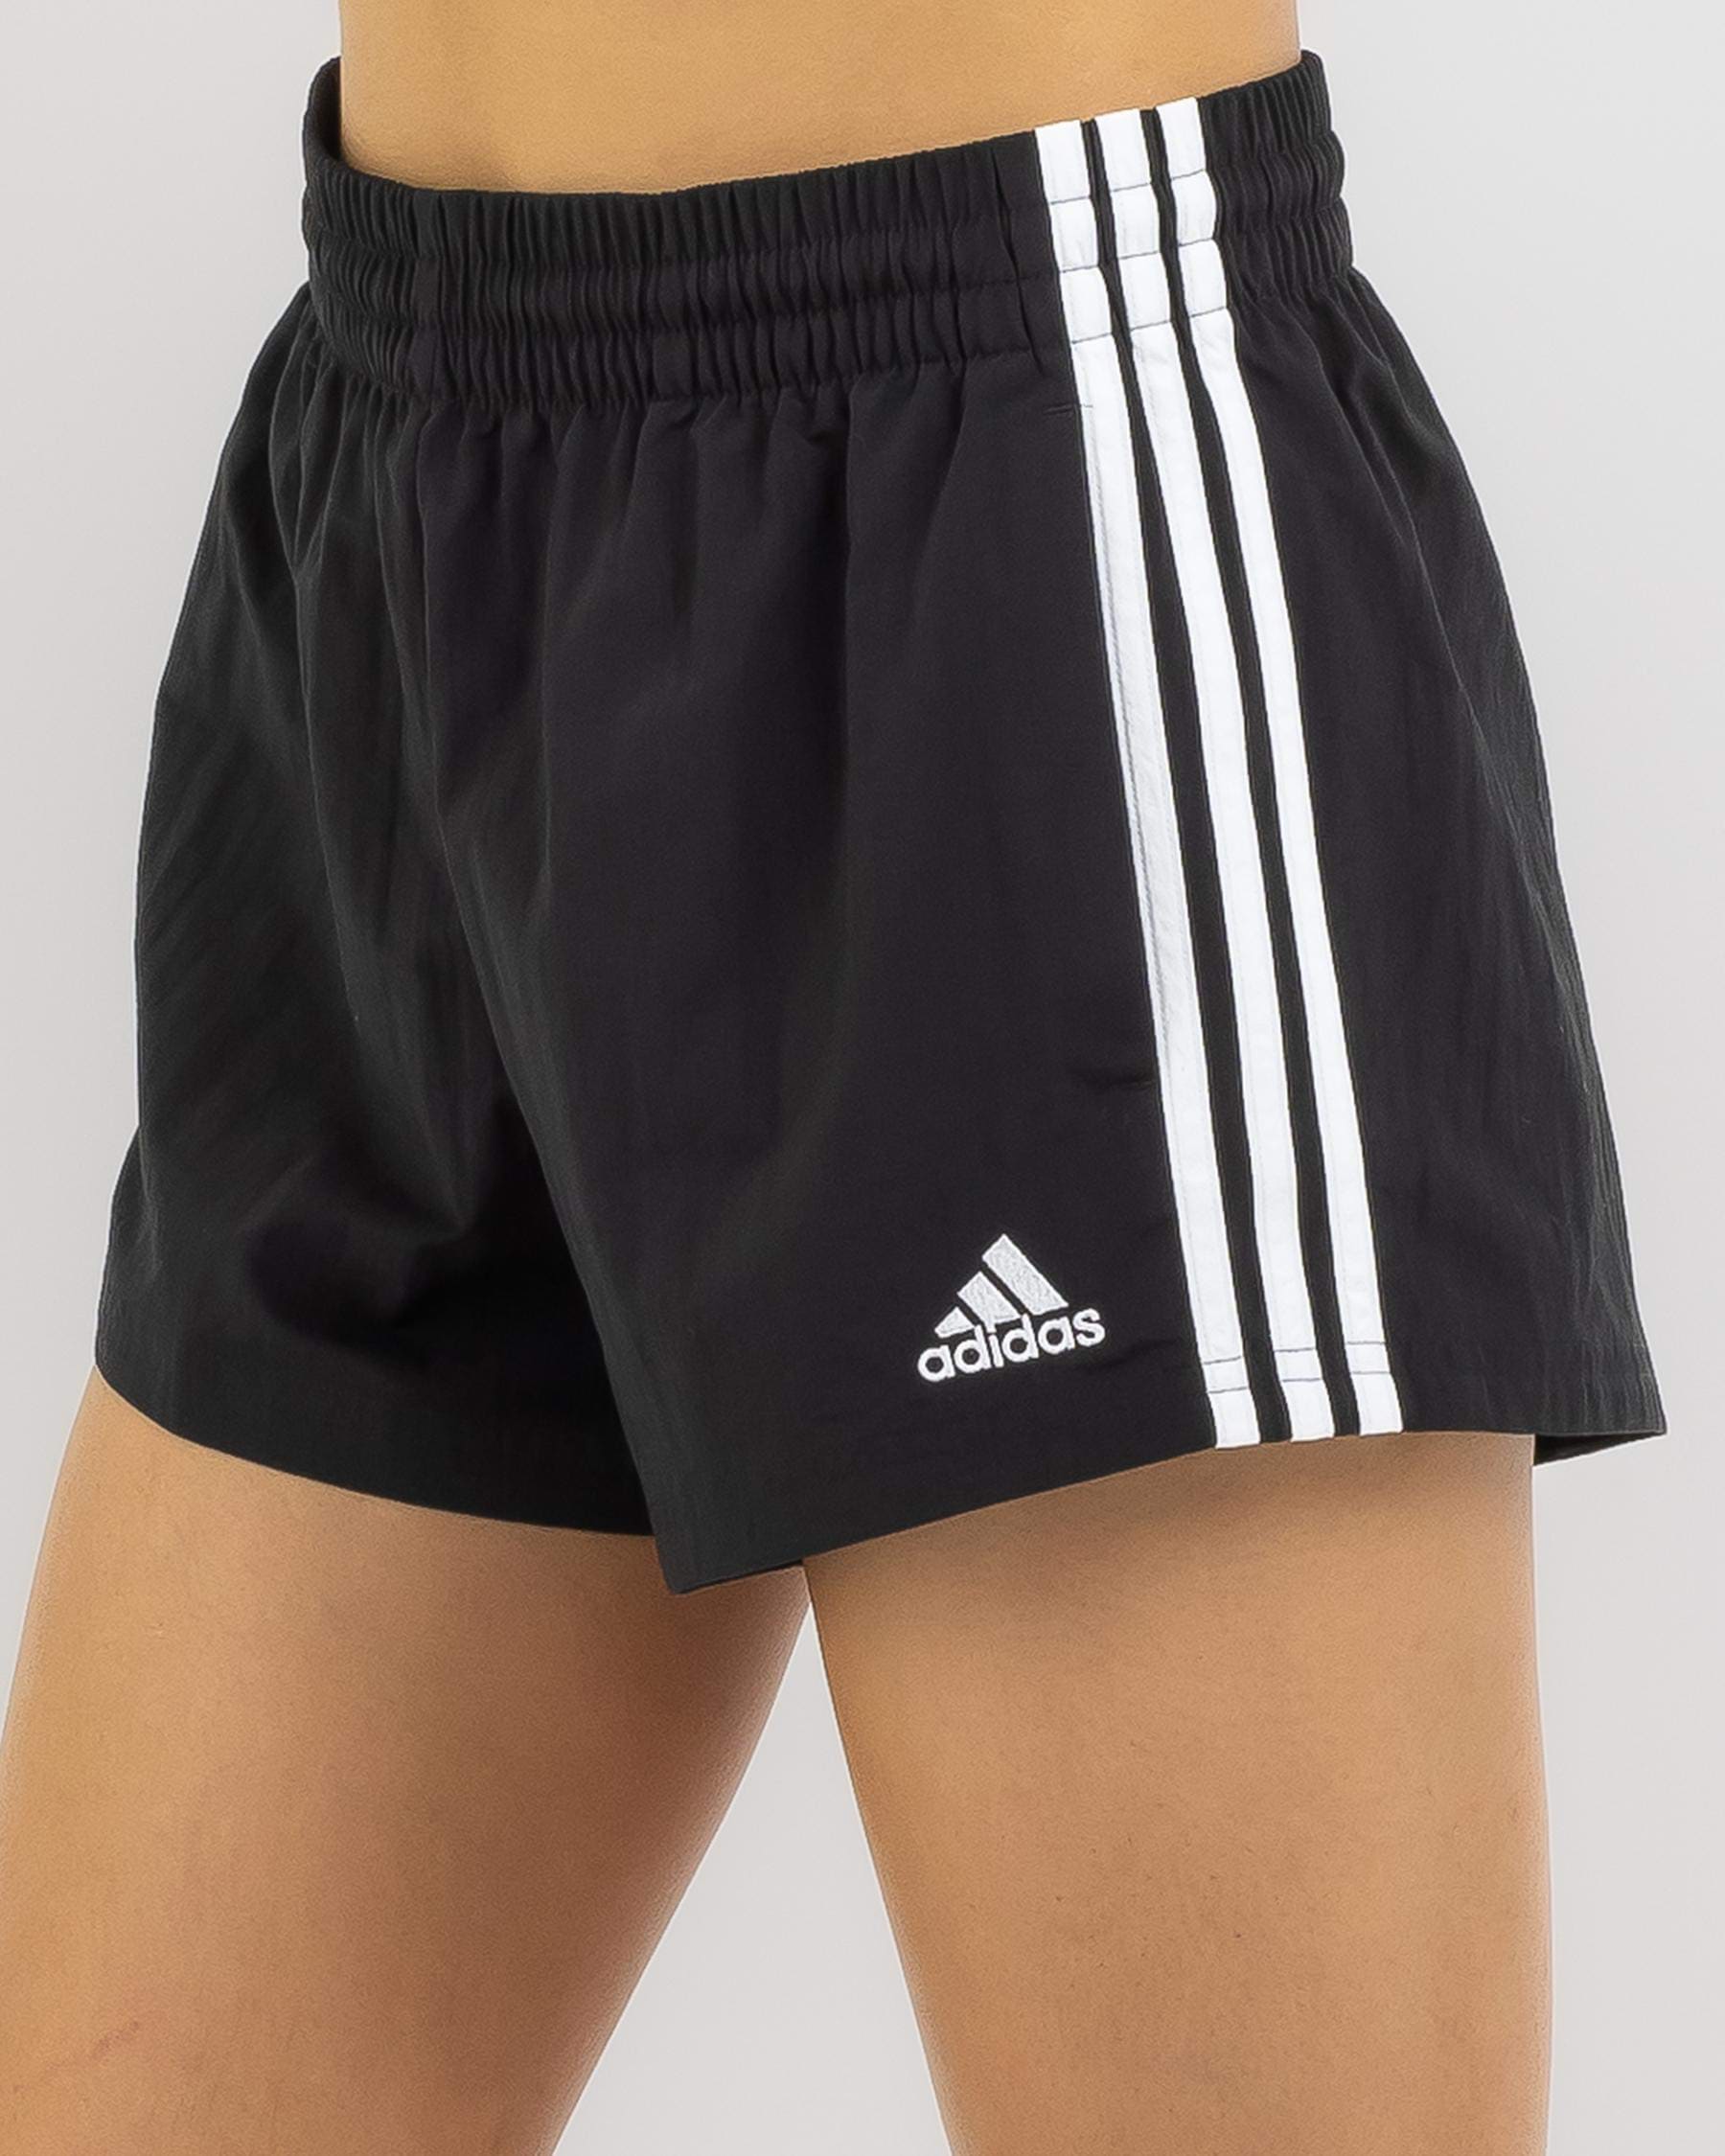 Adidas Essentials 3 Stripe Woven Shorts In Black/white - FREE* Shipping &  Easy Returns - City Beach United States